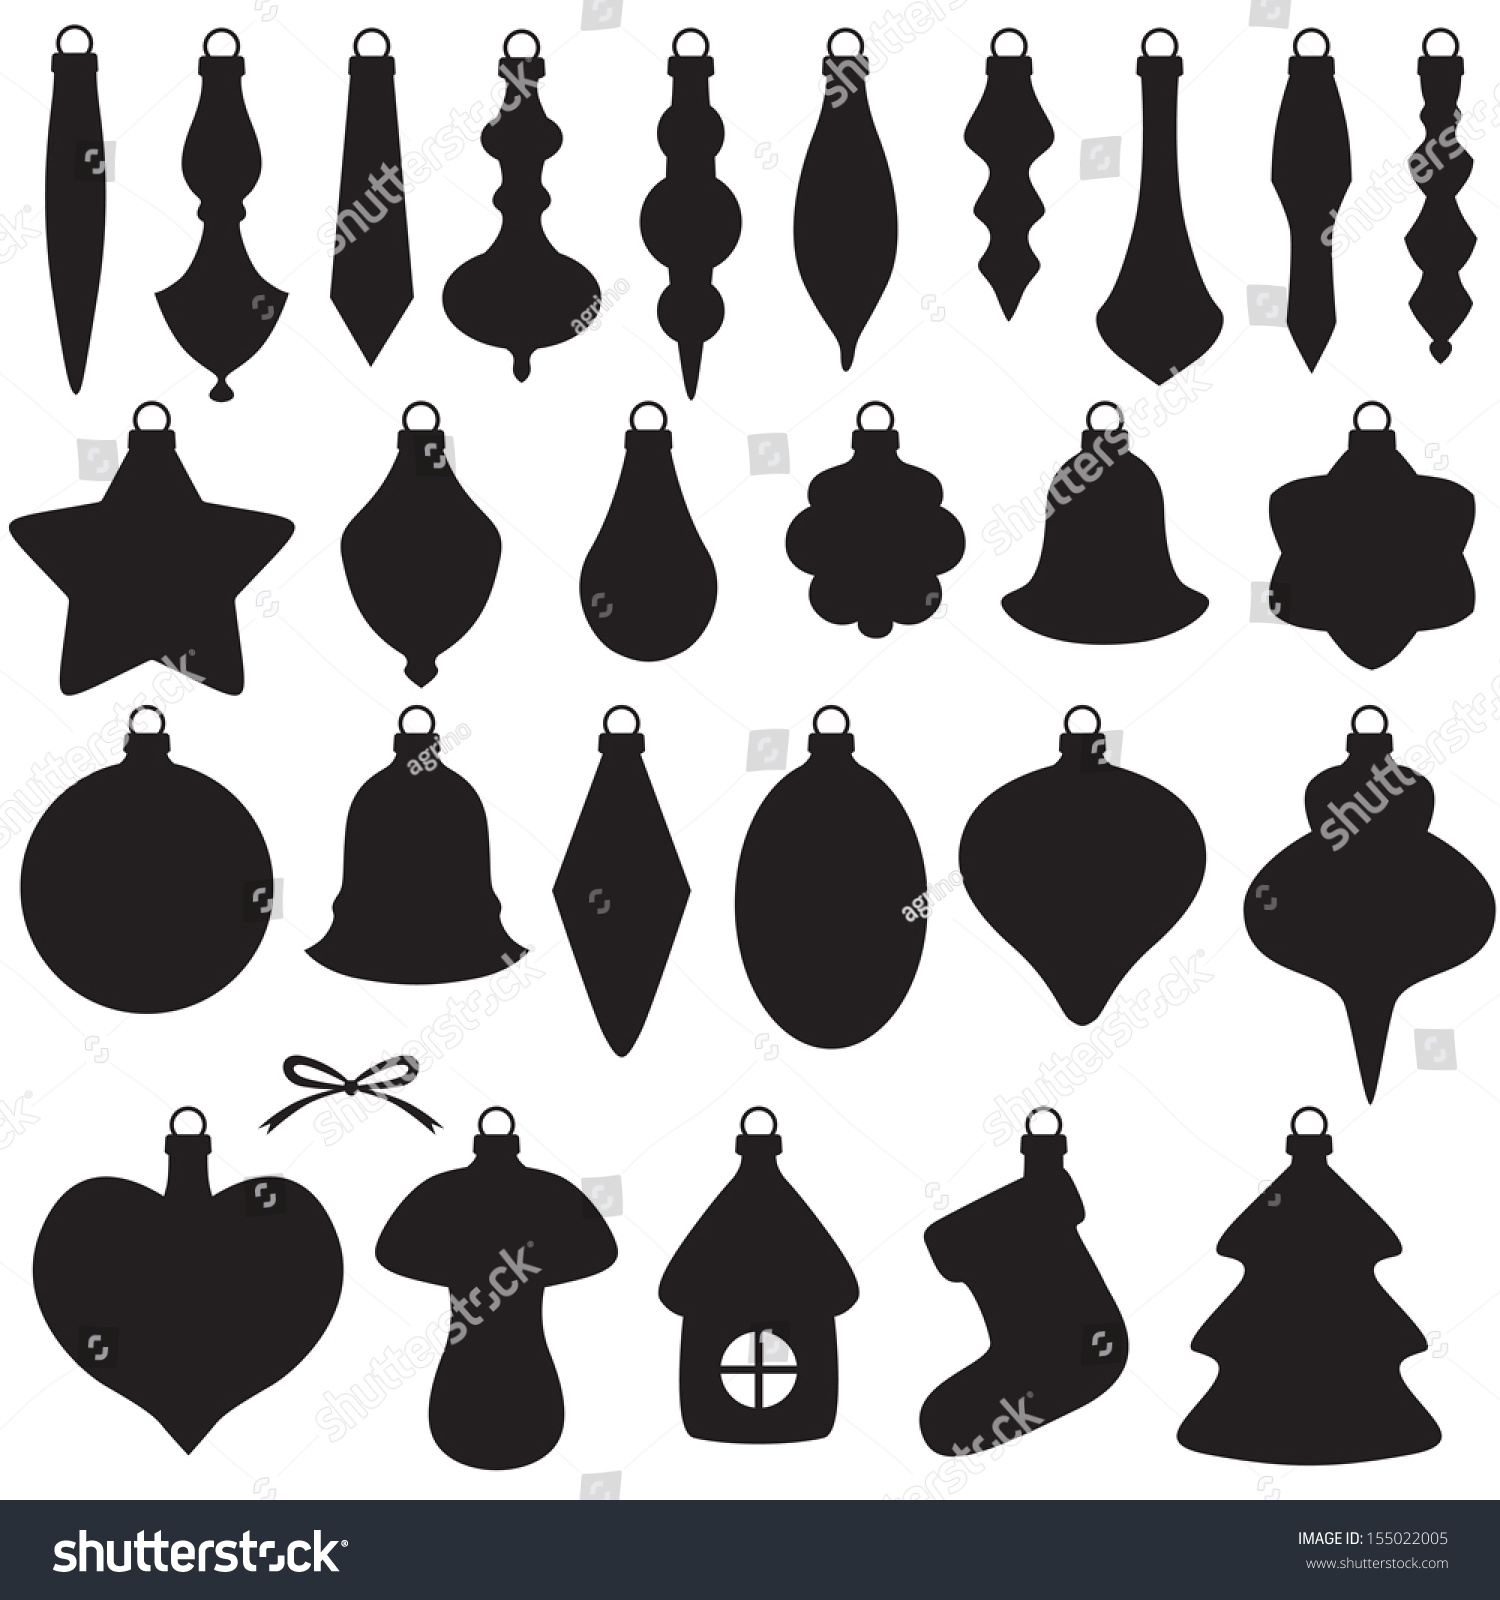 Silhouette Image Christmas Baubles Set Stock Vector 155022005 ...